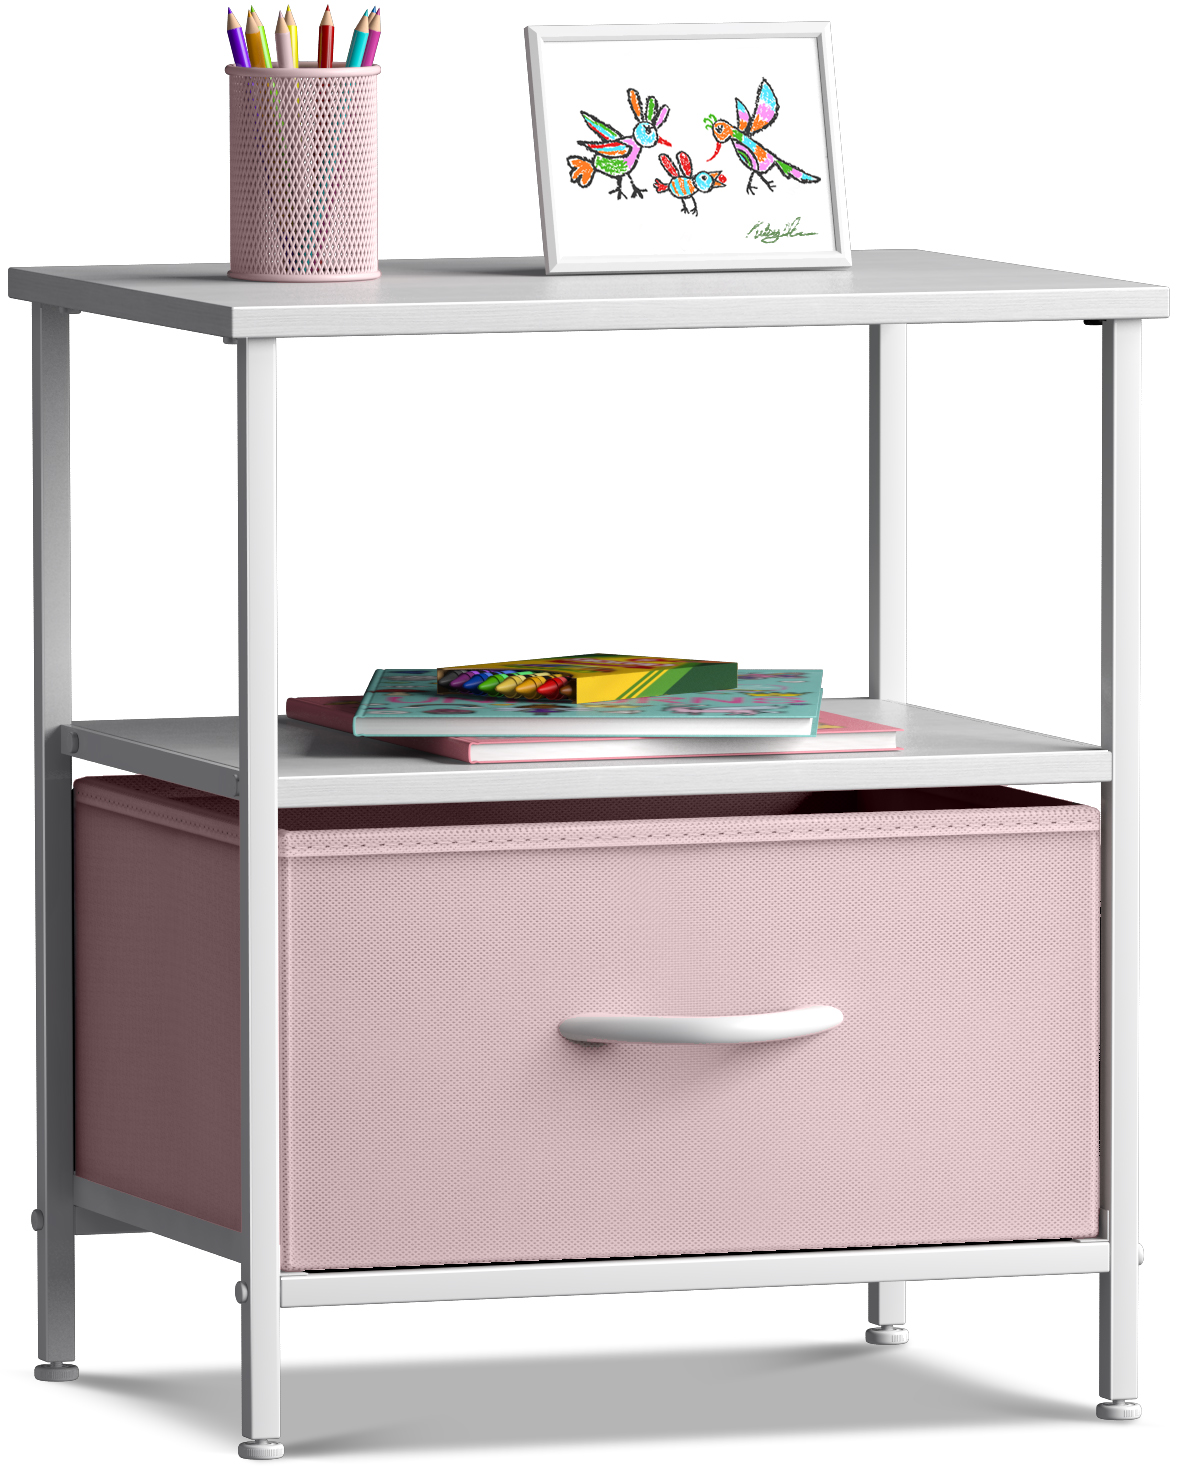 Sorbus Nightstand 1-Drawer Shelf Storage- Bedside Furniture  Accent End  Table Chest for Home, Bedroom, Office, College Dorm, Steel Frame, Wood Top,  Pastel Fabric Bins (Pastel Pink)